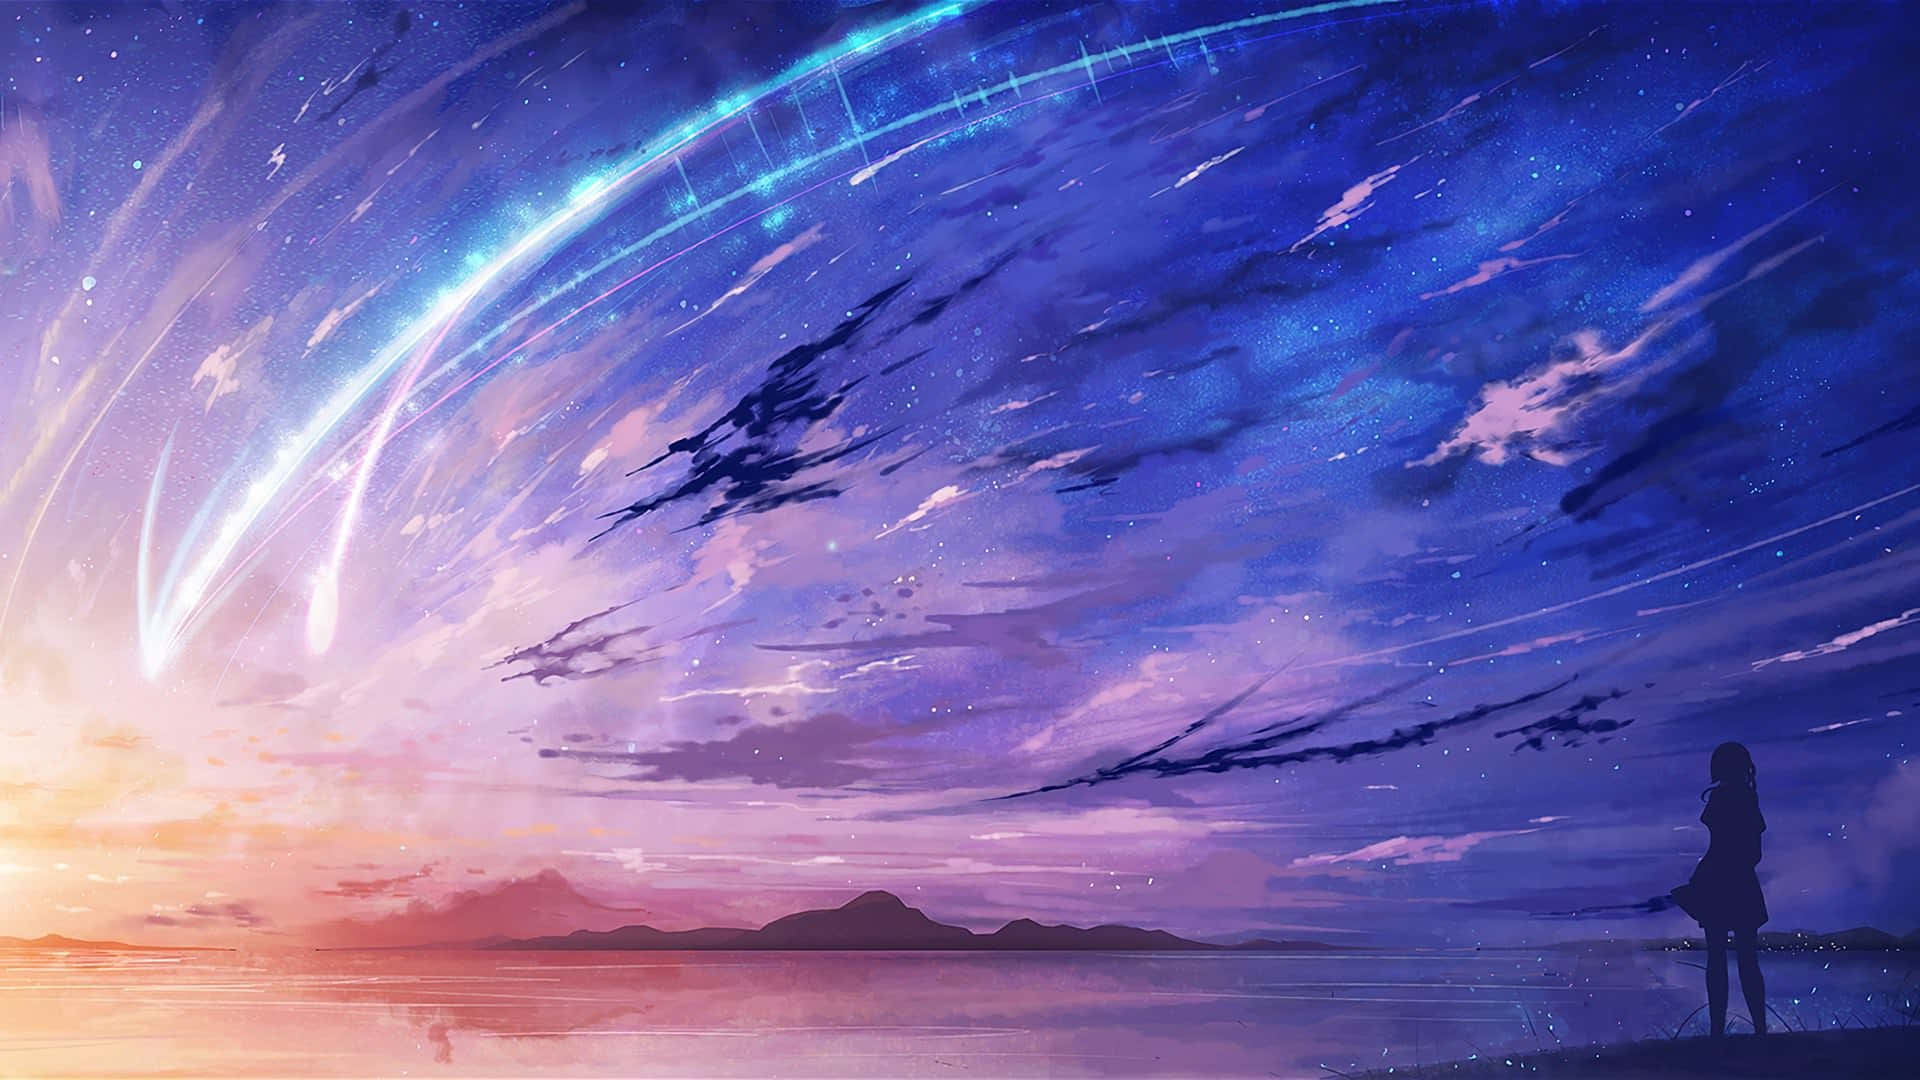 Experience The Beauty Of A Stunning Anime-inspired Sky.